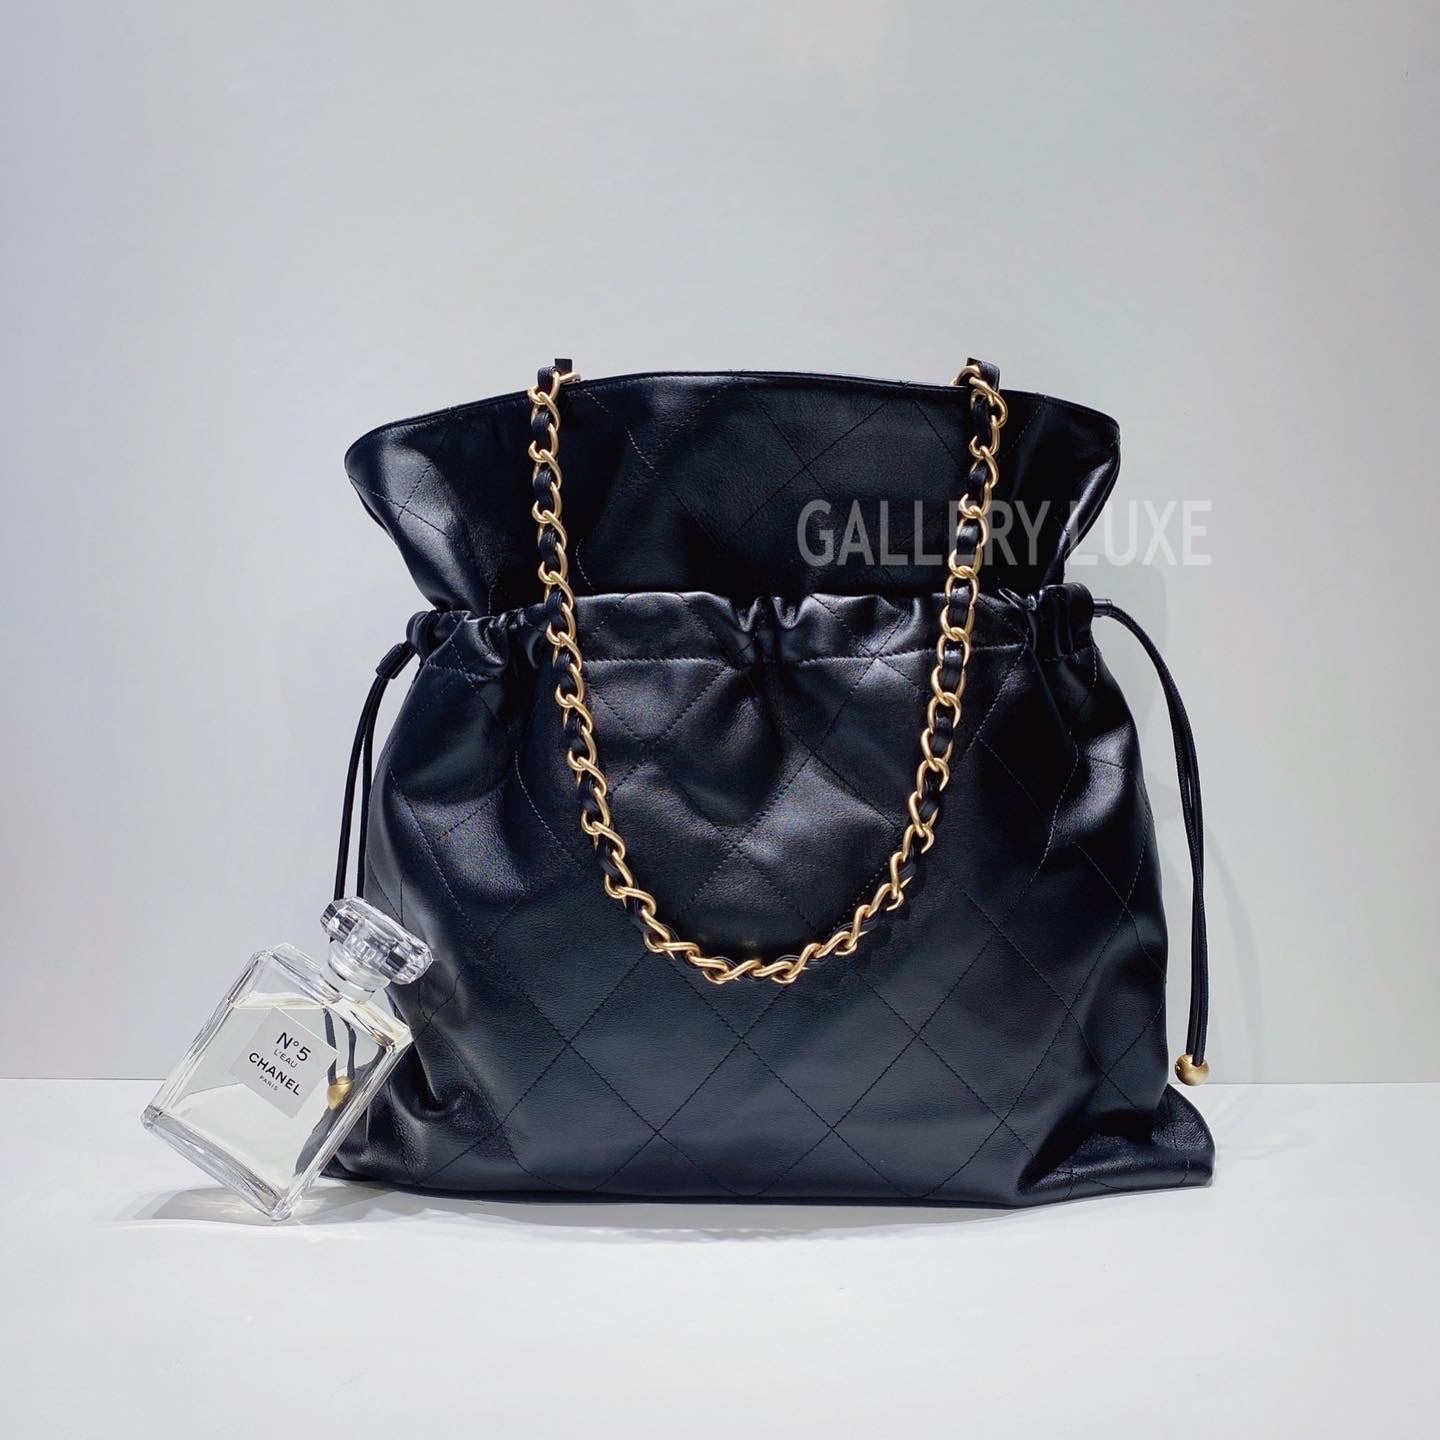 No.3383-Chanel Large Coco Purse Tote Bag (Unused / 未使用品) – Gallery Luxe